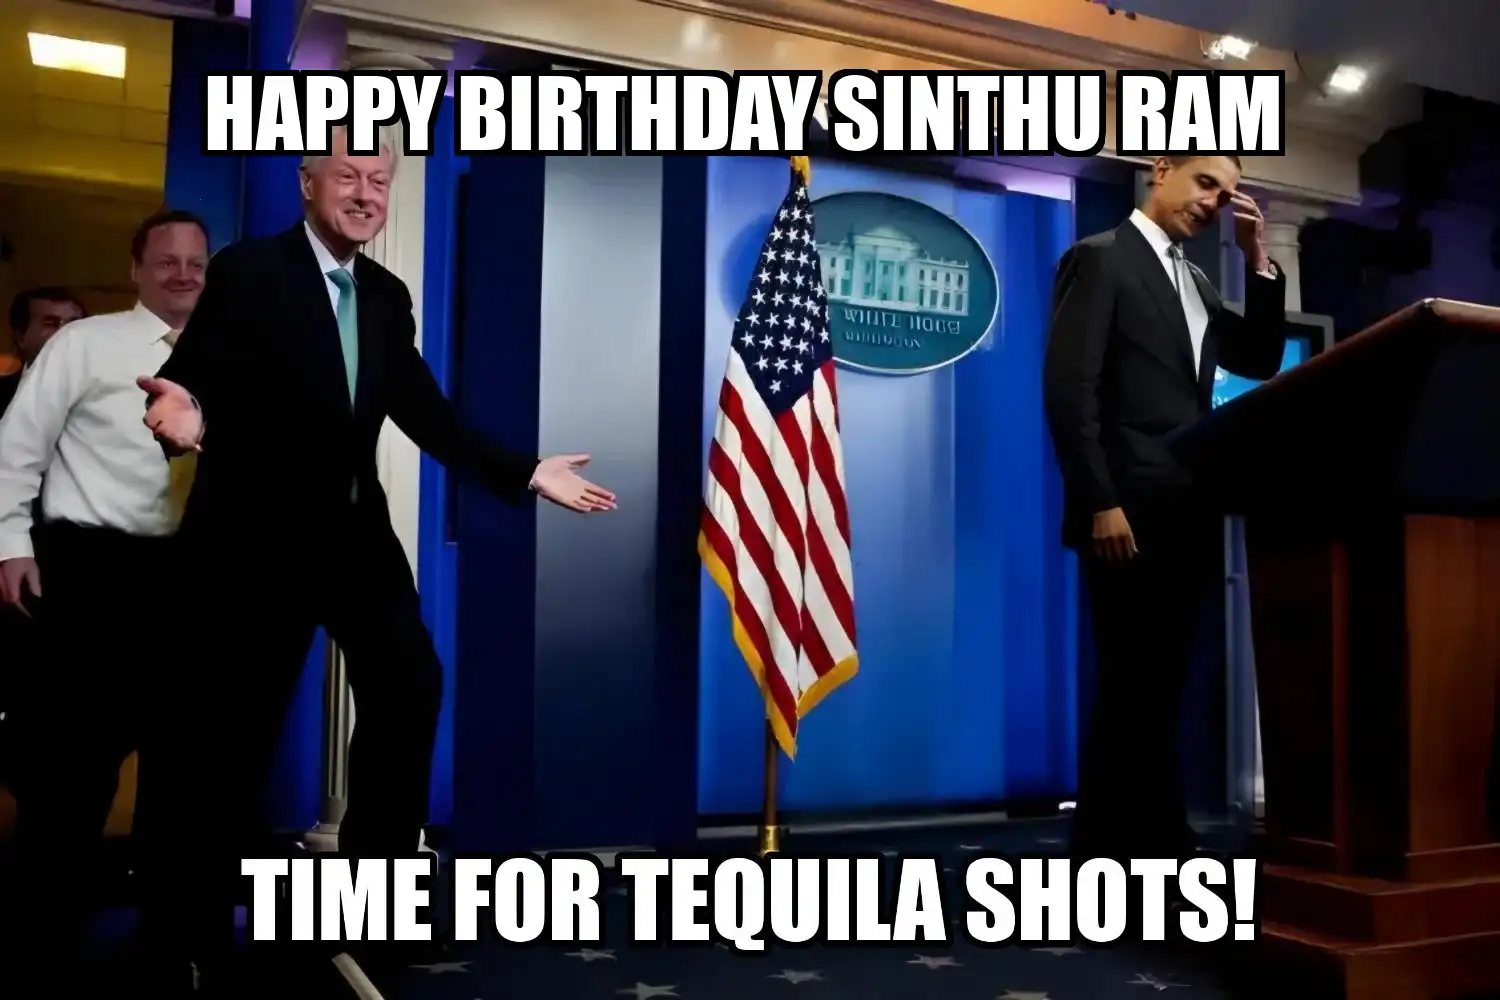 Happy Birthday Sinthu ram Time For Tequila Shots Memes